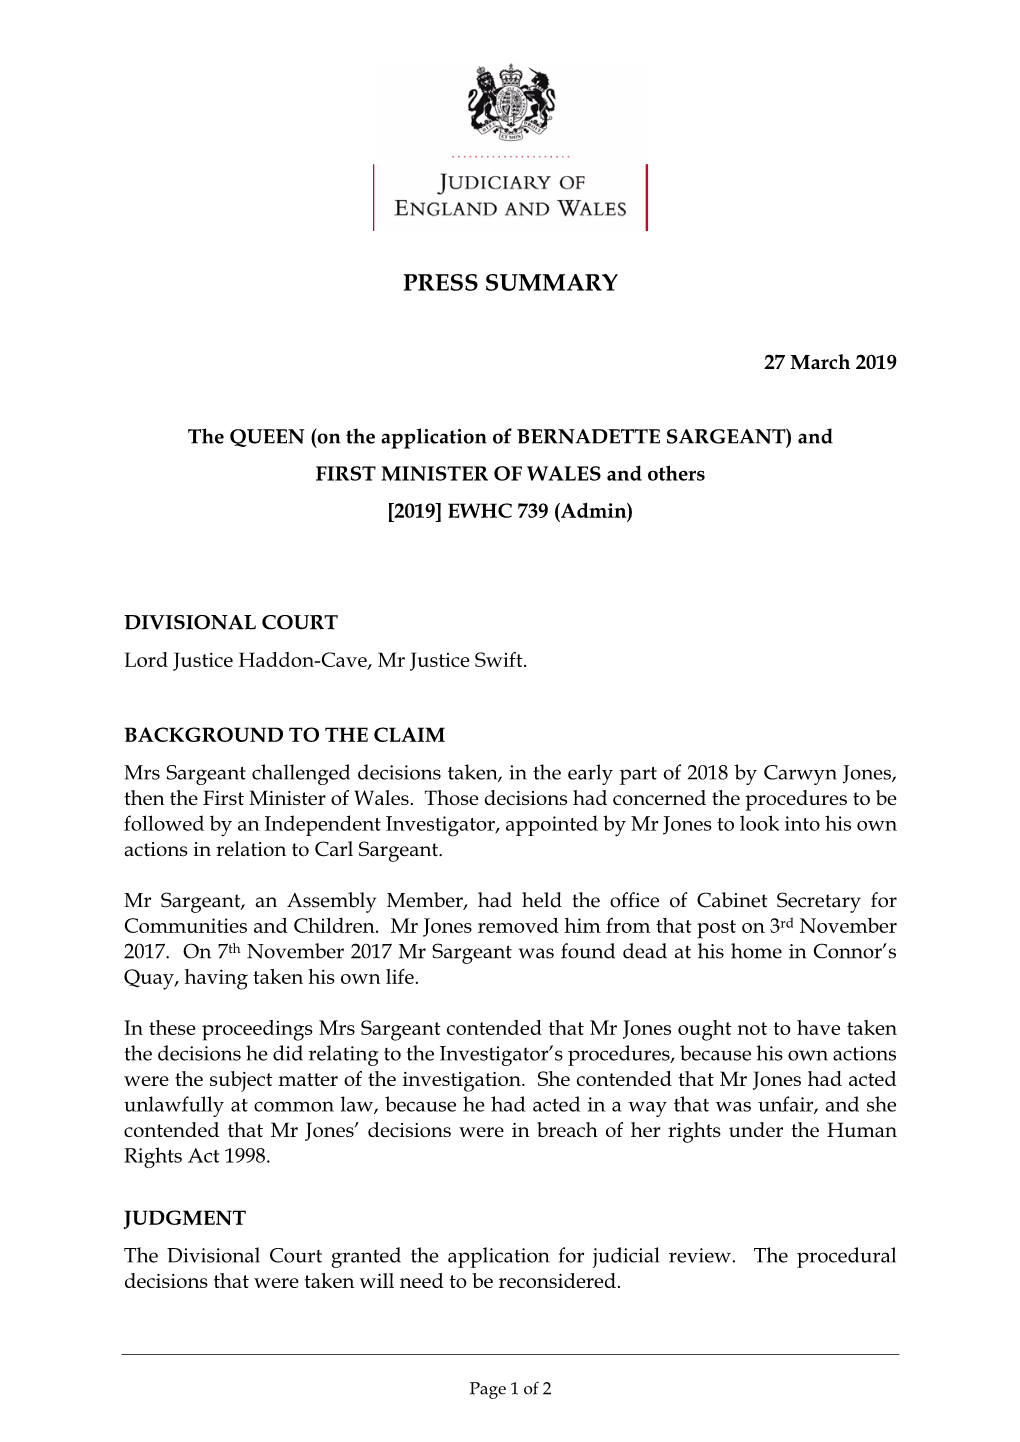 Saregeant V First Minister of Wales Press Summary